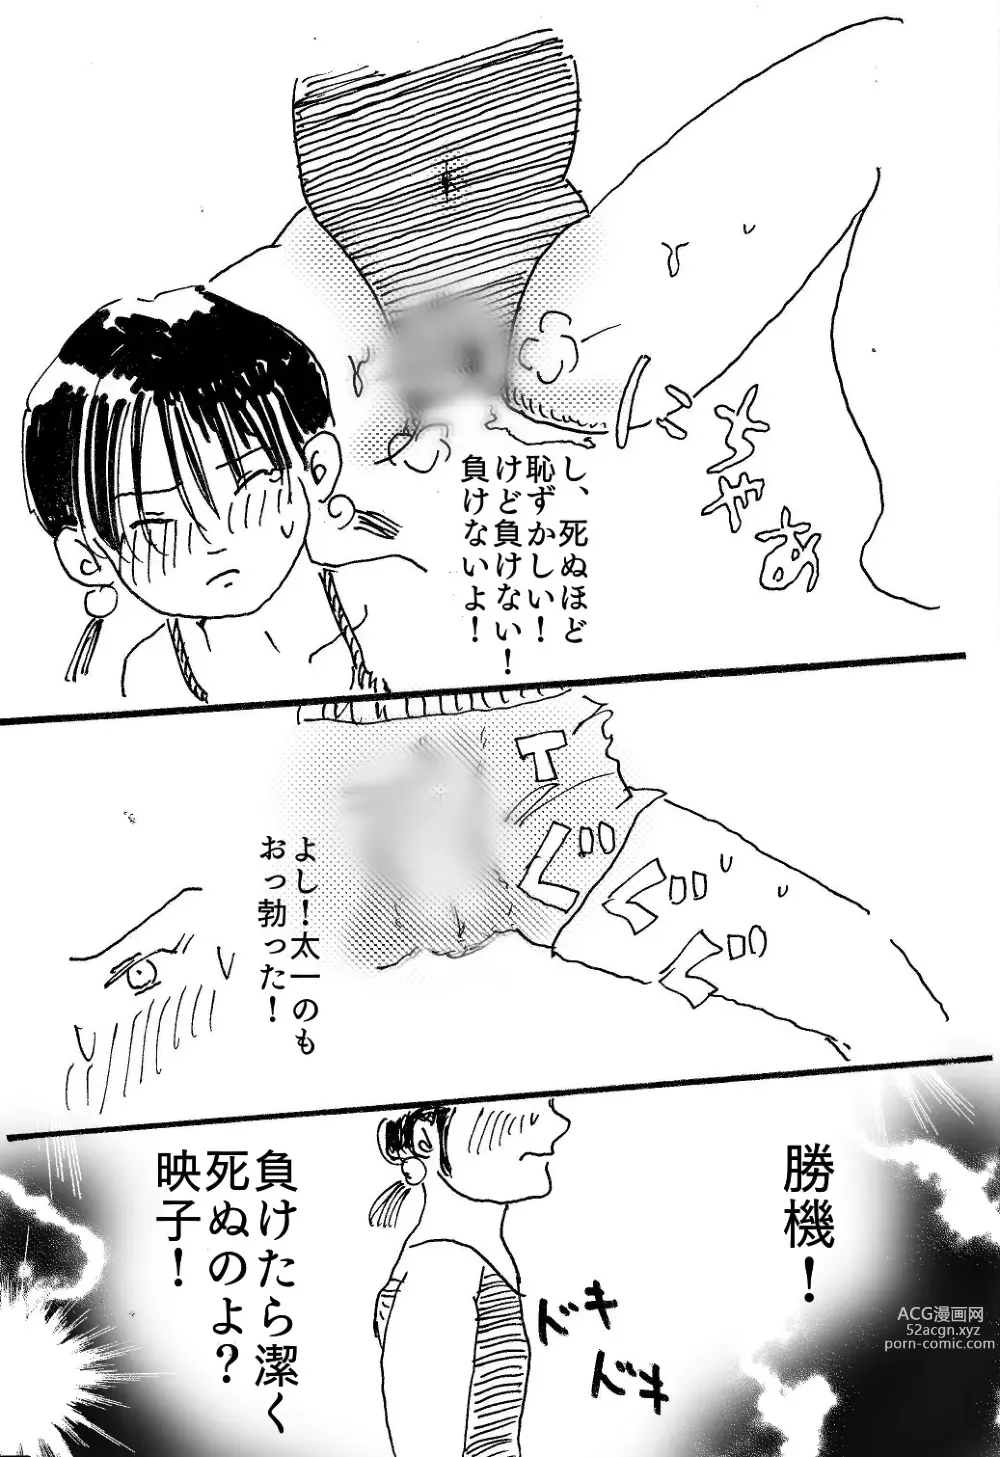 Page 10 of doujinshi 映子と太一